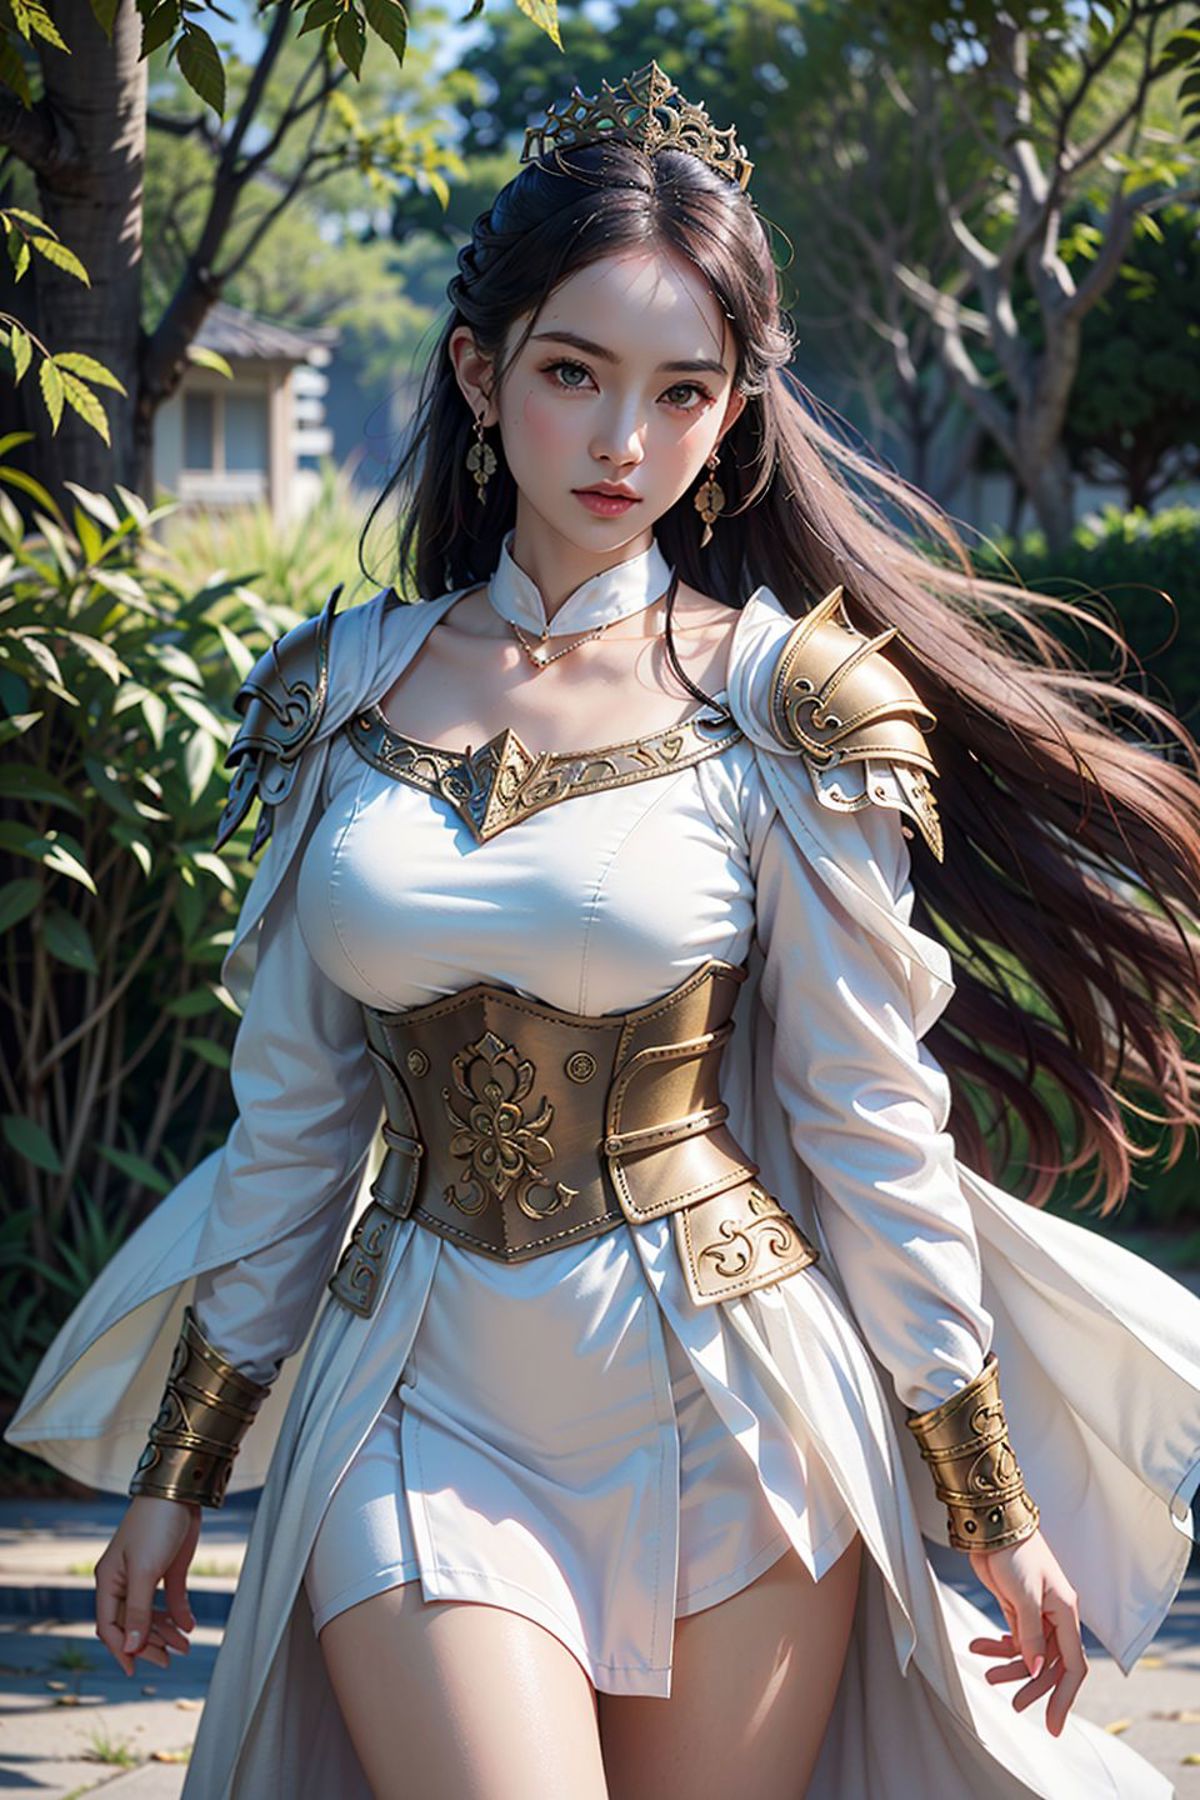 [Lah] Ancient Chinese General Armor | 女铠 image by ylnnn